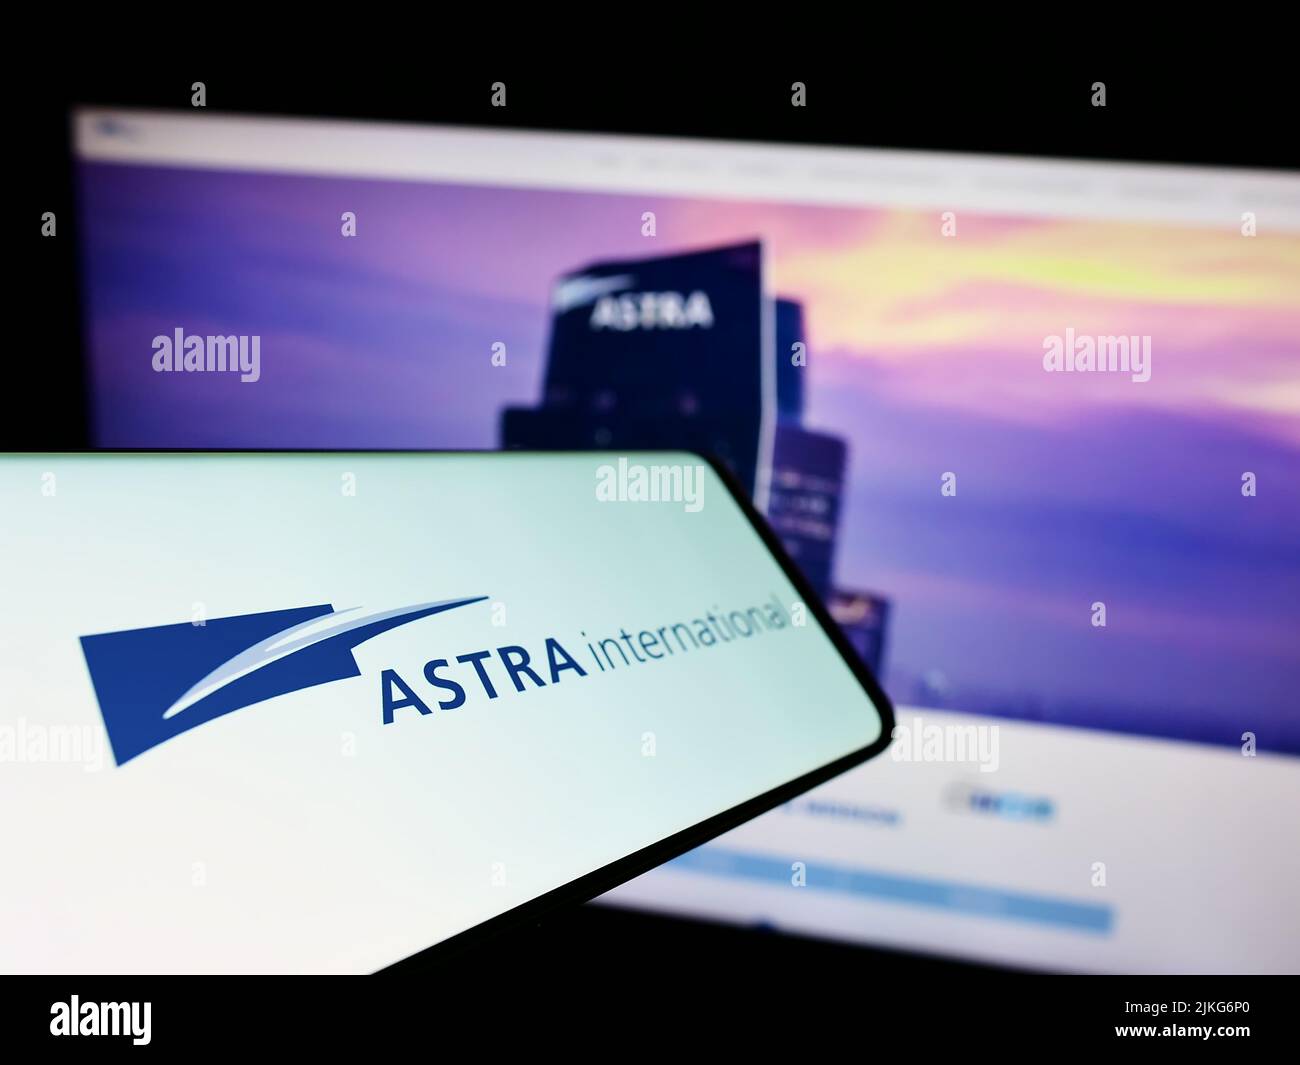 Smartphone with logo of Indonesian company PT Astra International Tbk on screen in front of website. Focus on center-left of phone display. Stock Photo